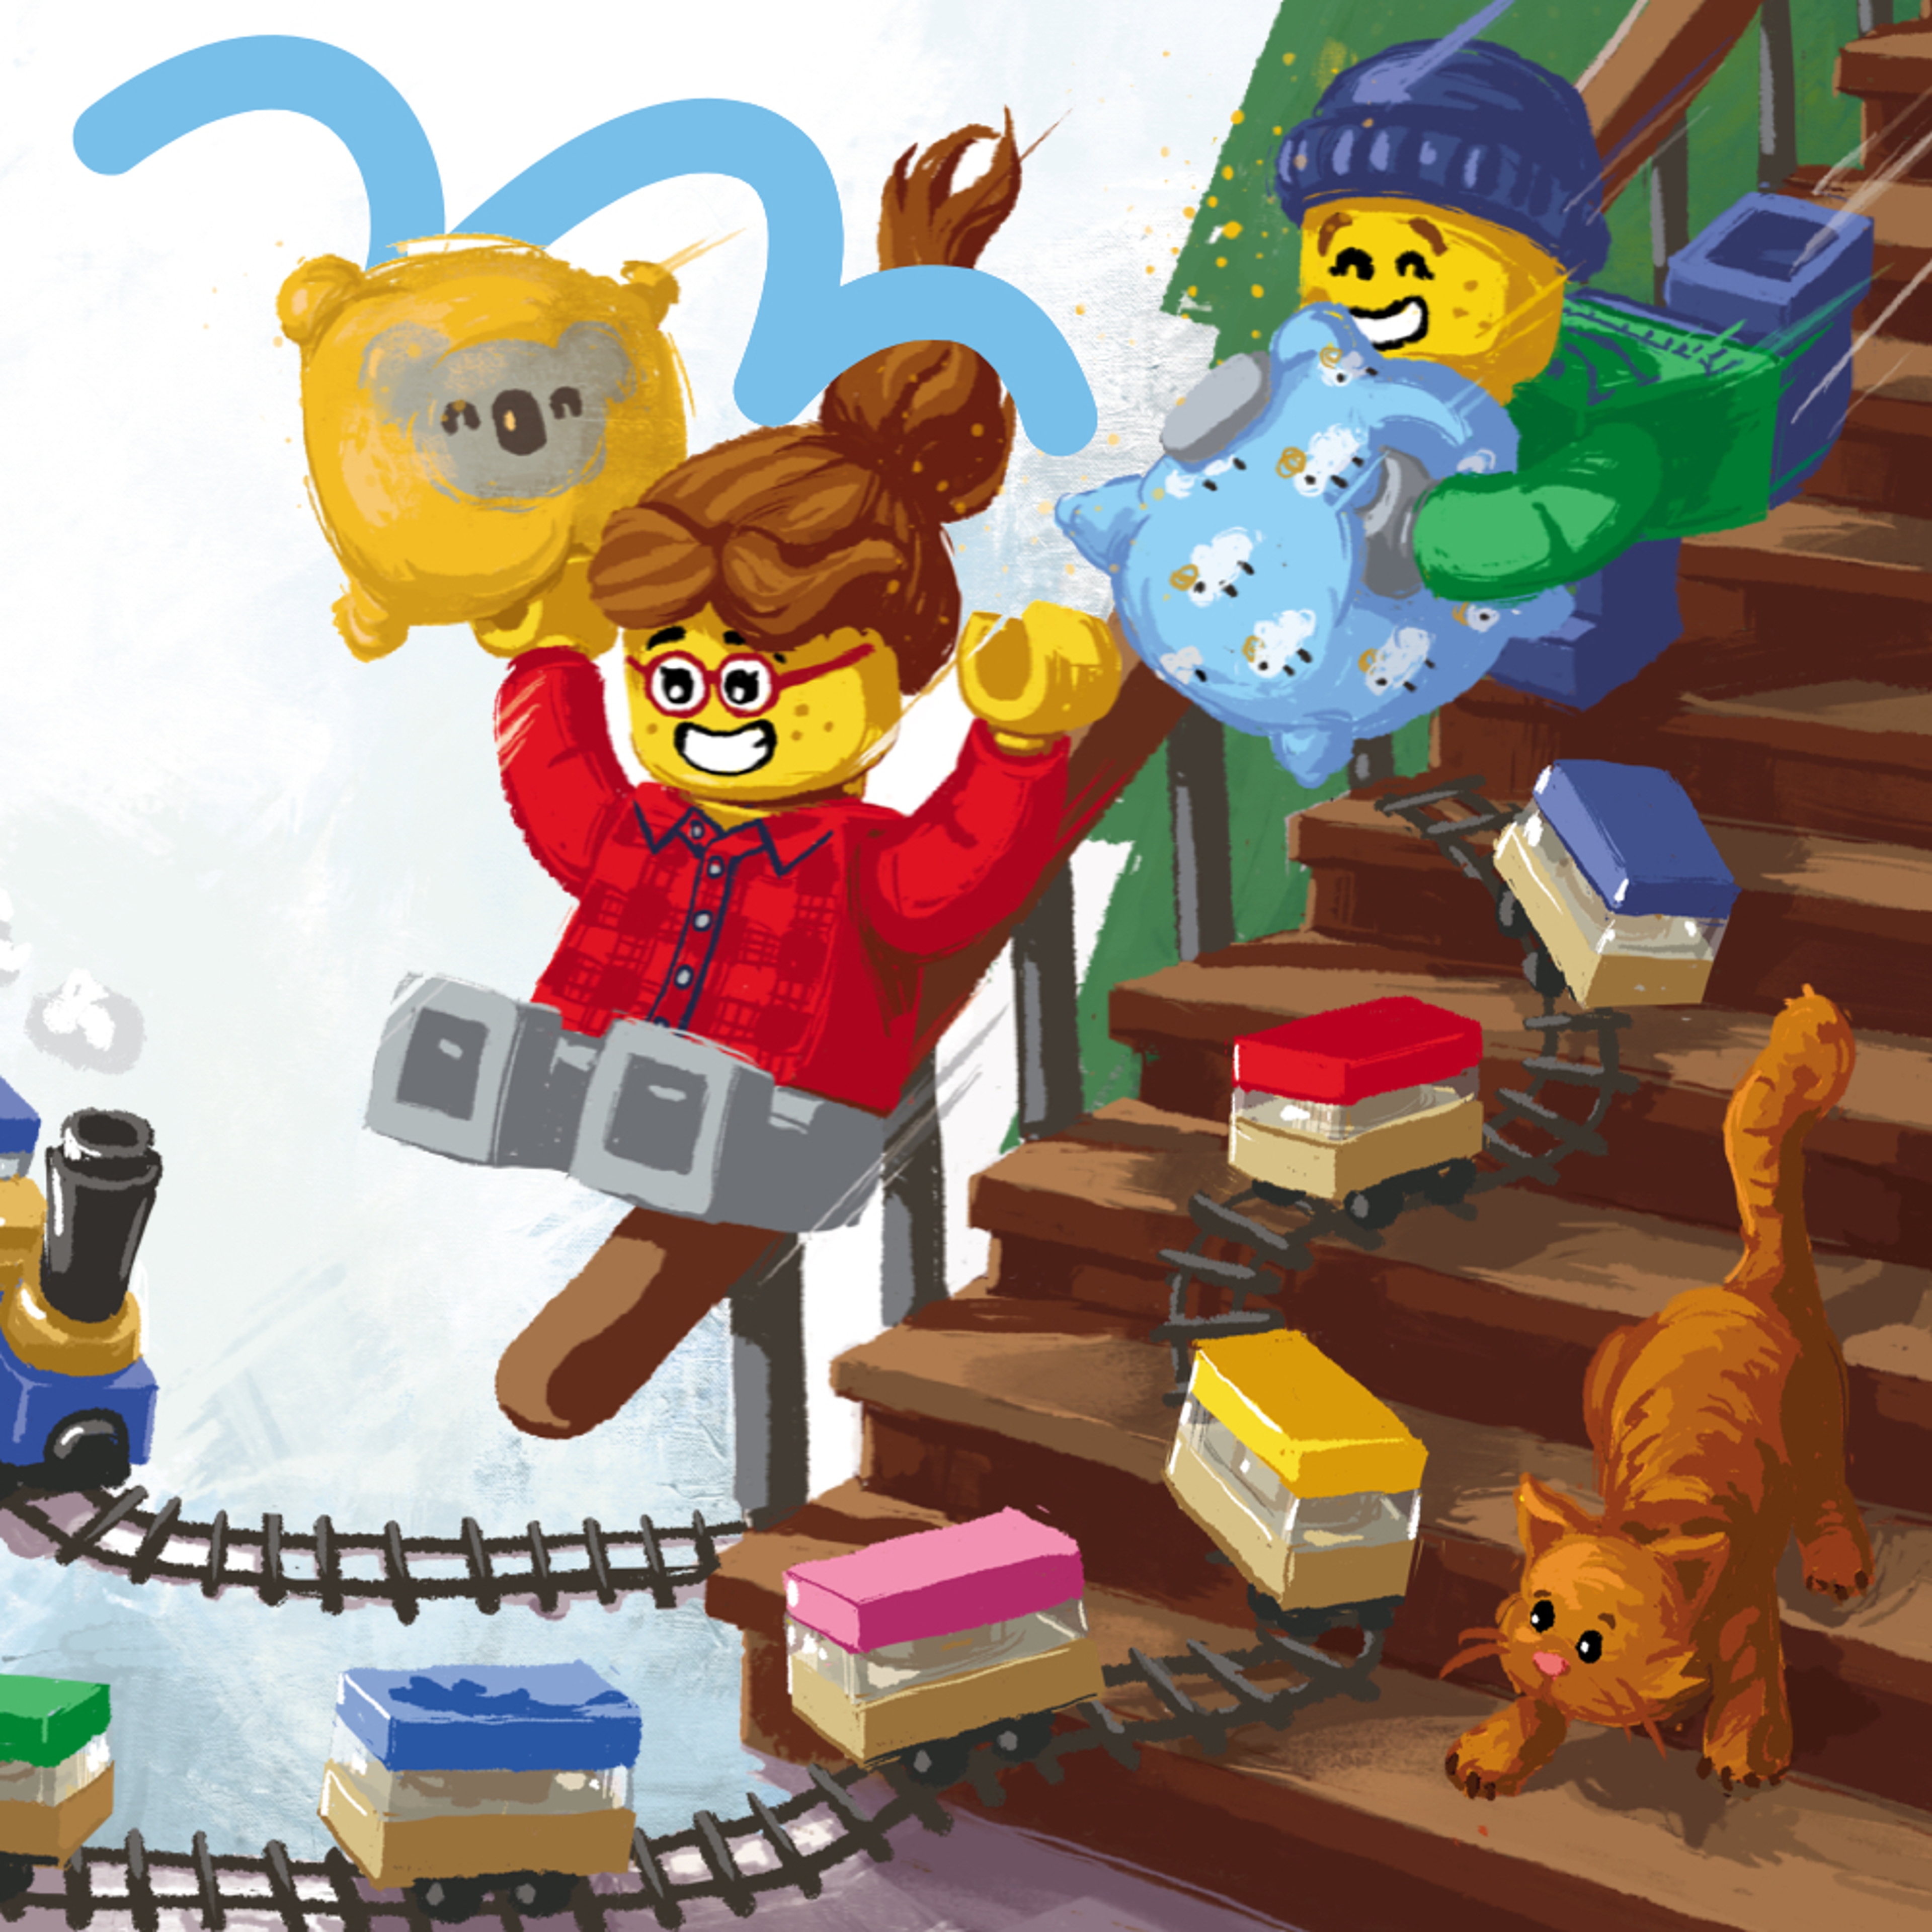 Minifigures racing down the stairs to play with a LEGO train build